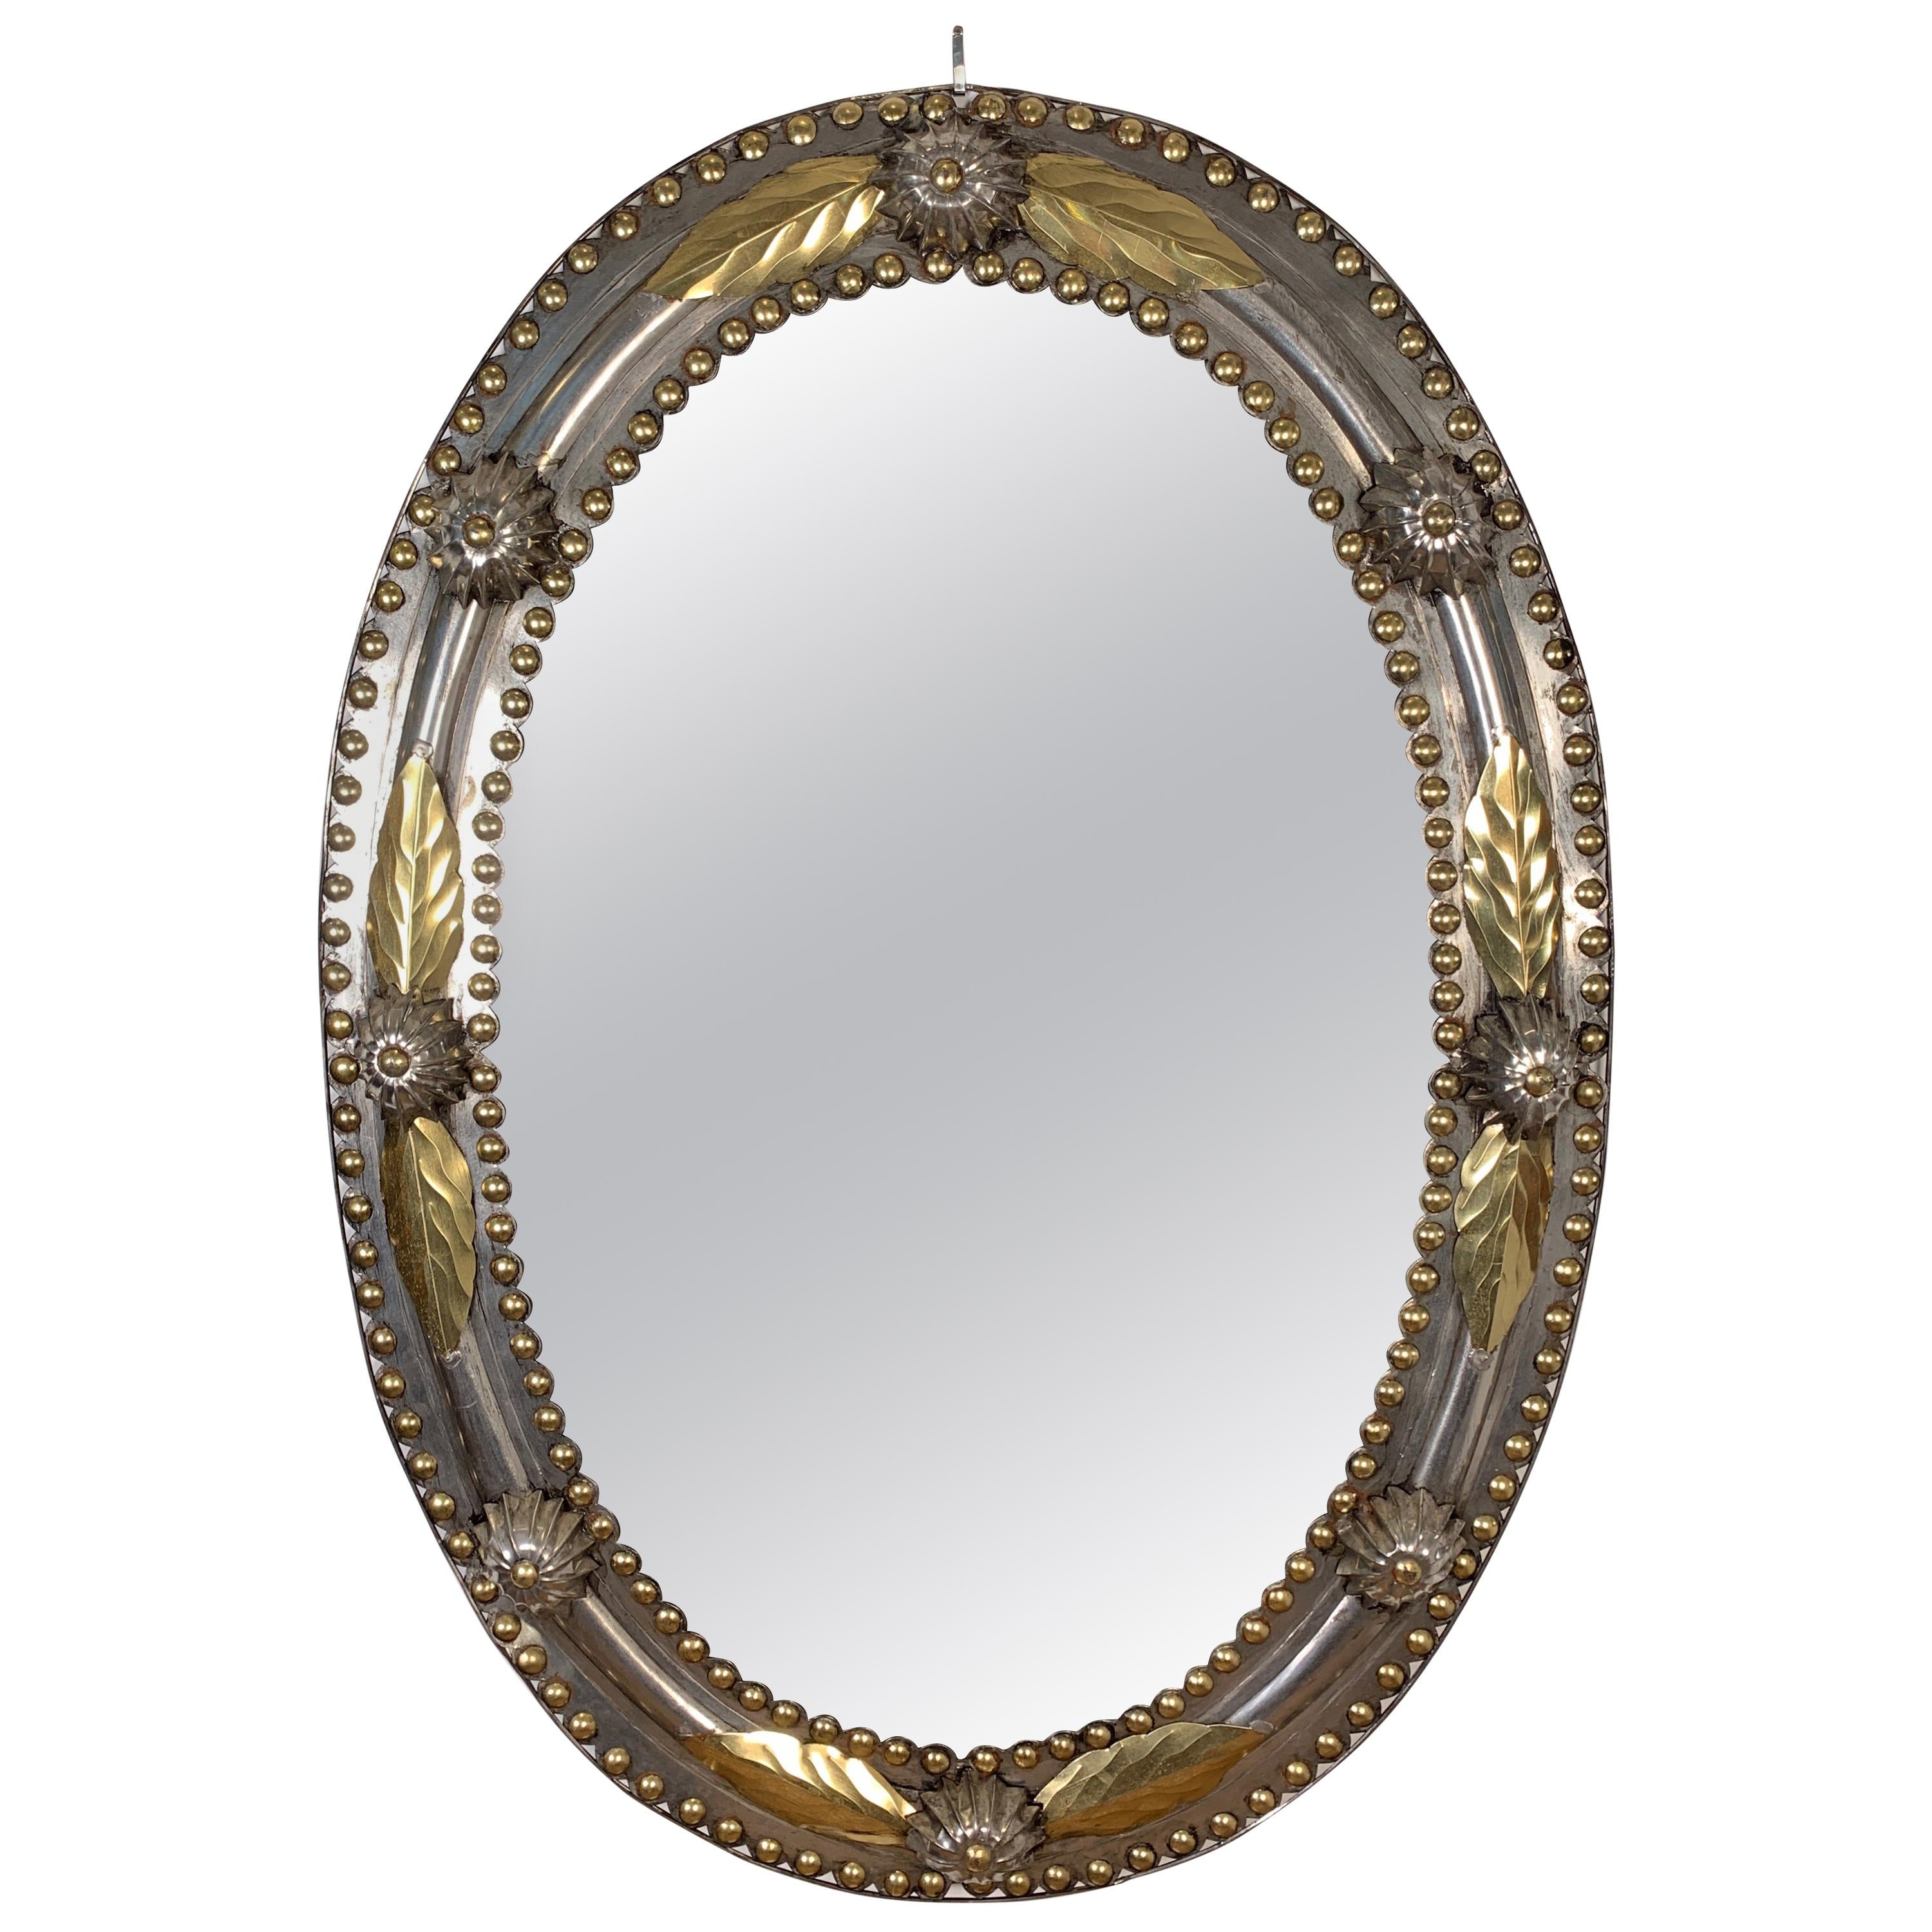 Brass and Steel Oval Mirror